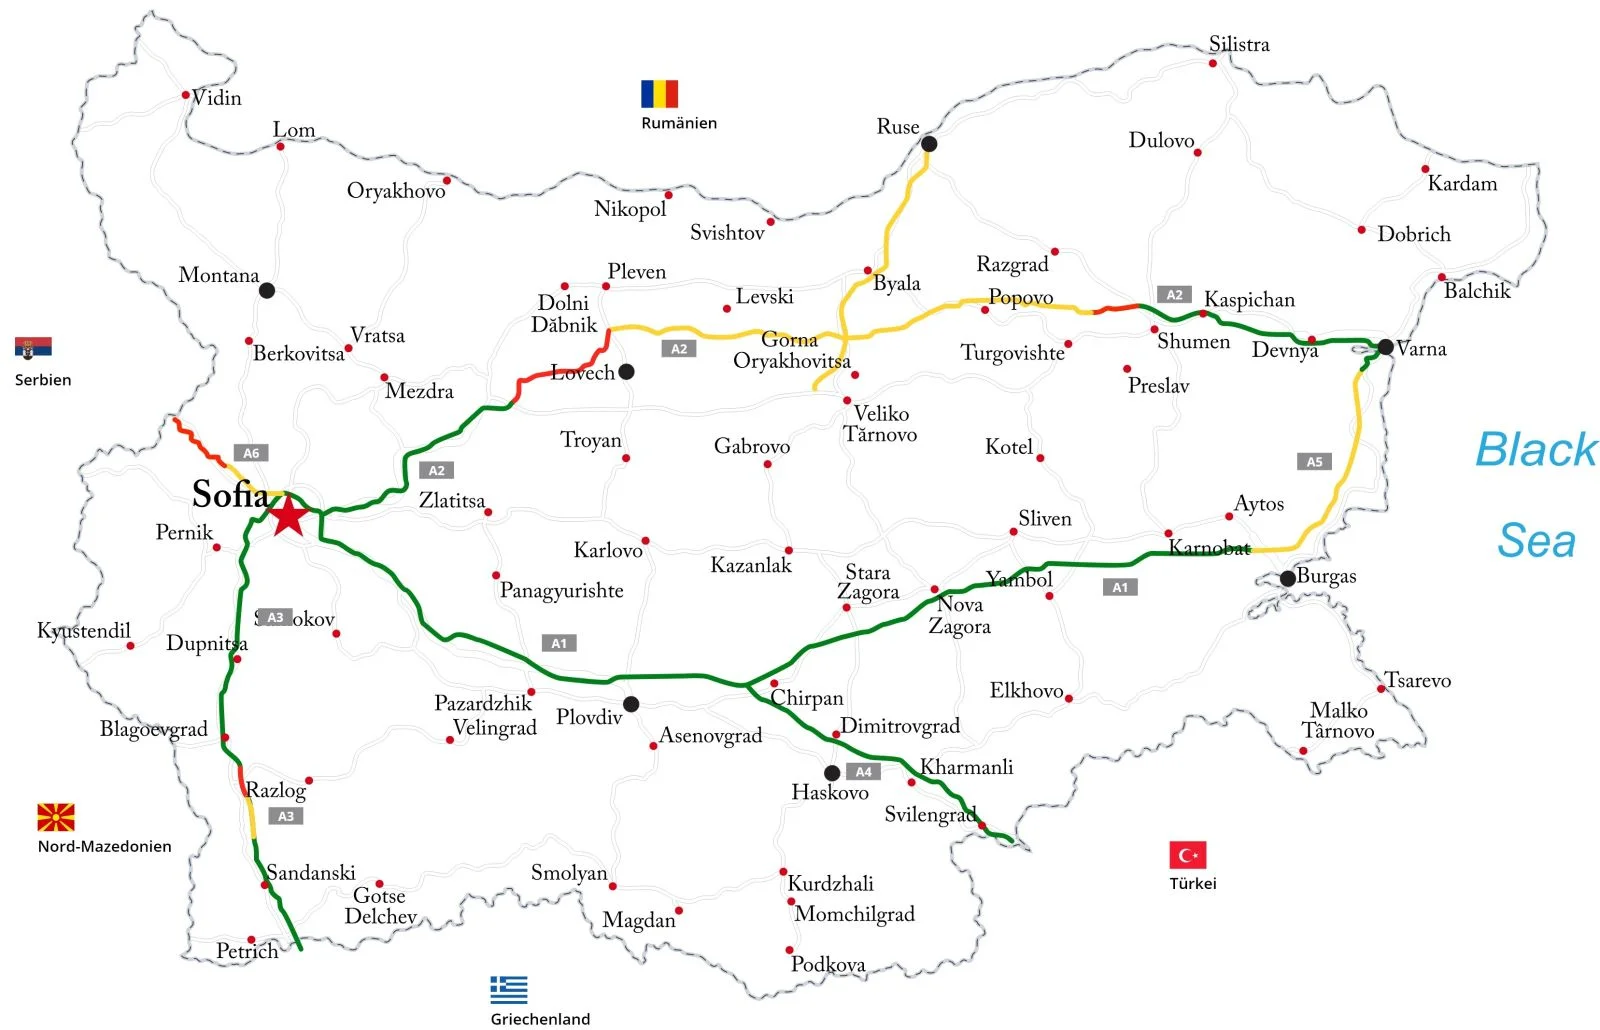 The following map shows that the highway network in Bulgaria extends over large parts of the country.